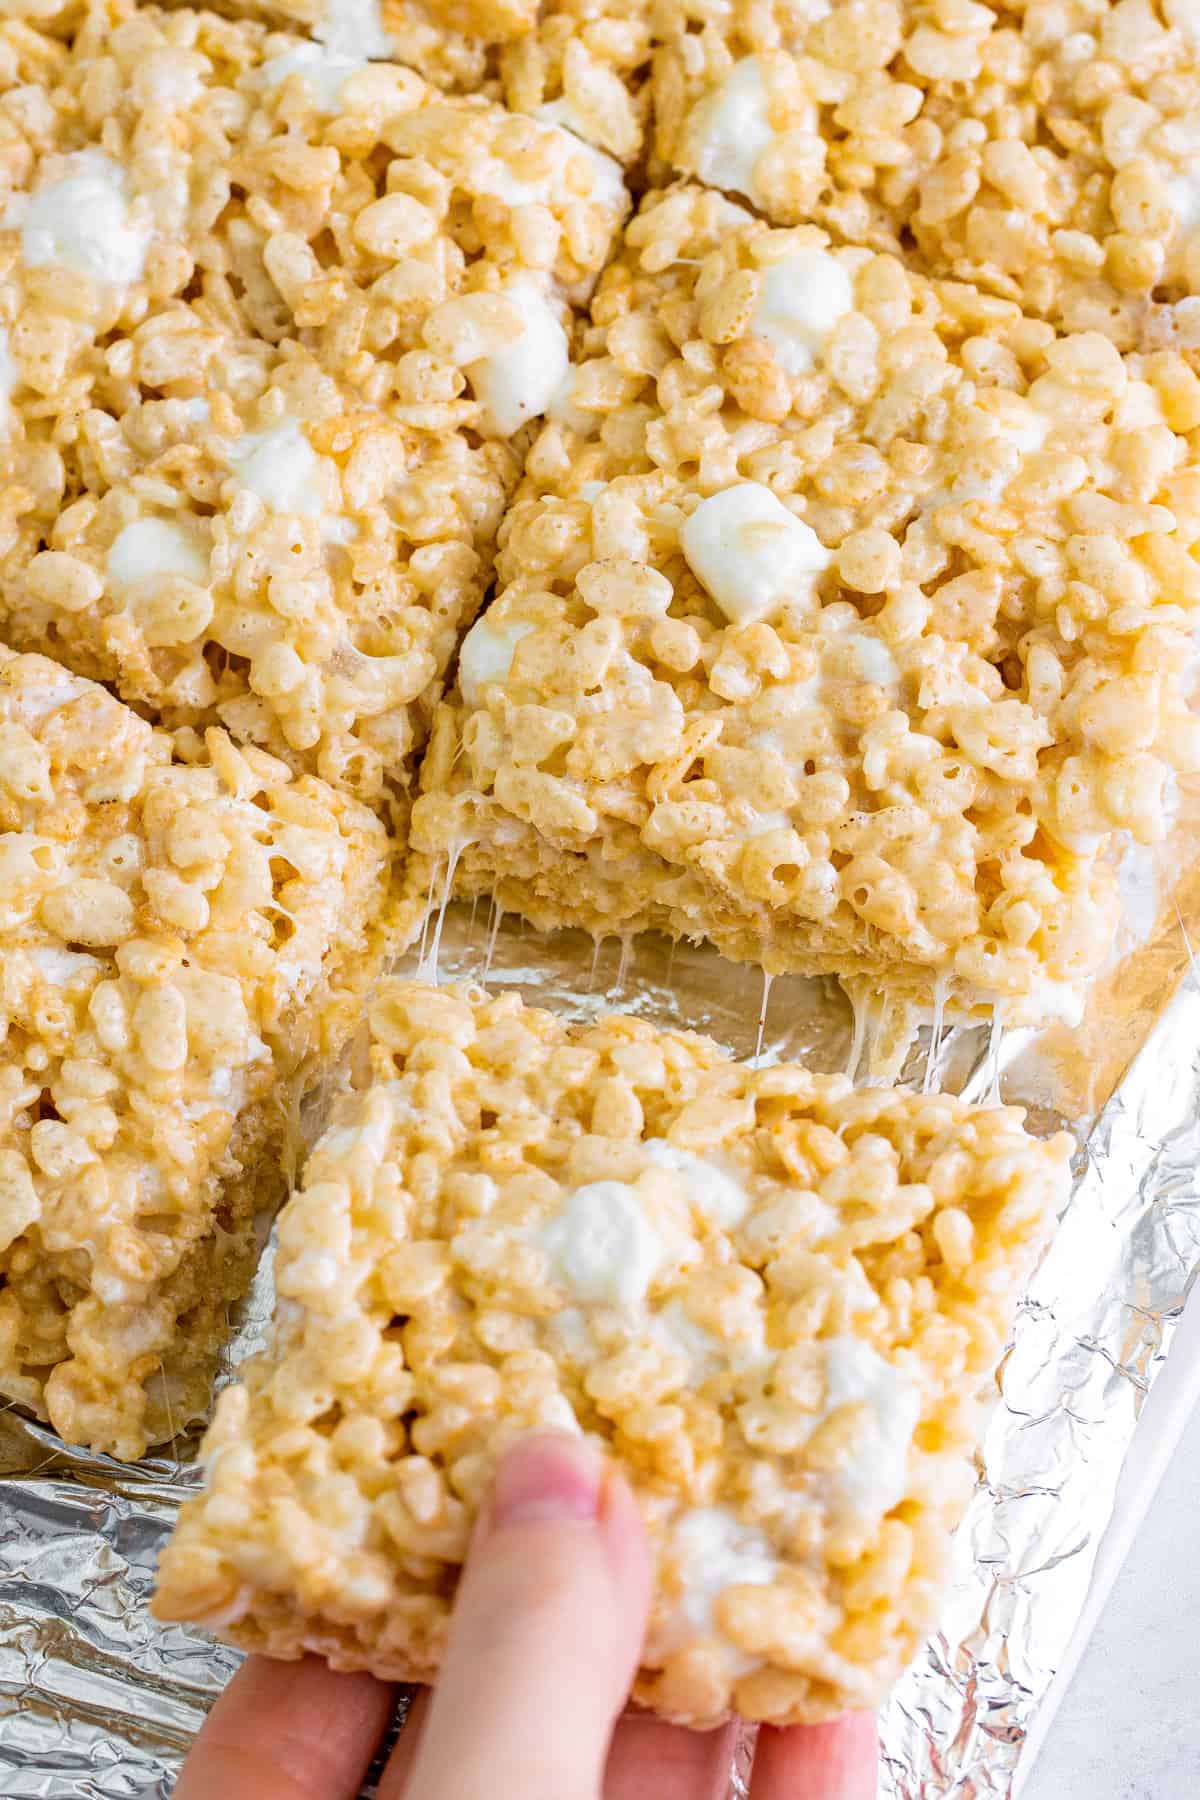 Gooey rice krispie treat being pulled from tray of treats.